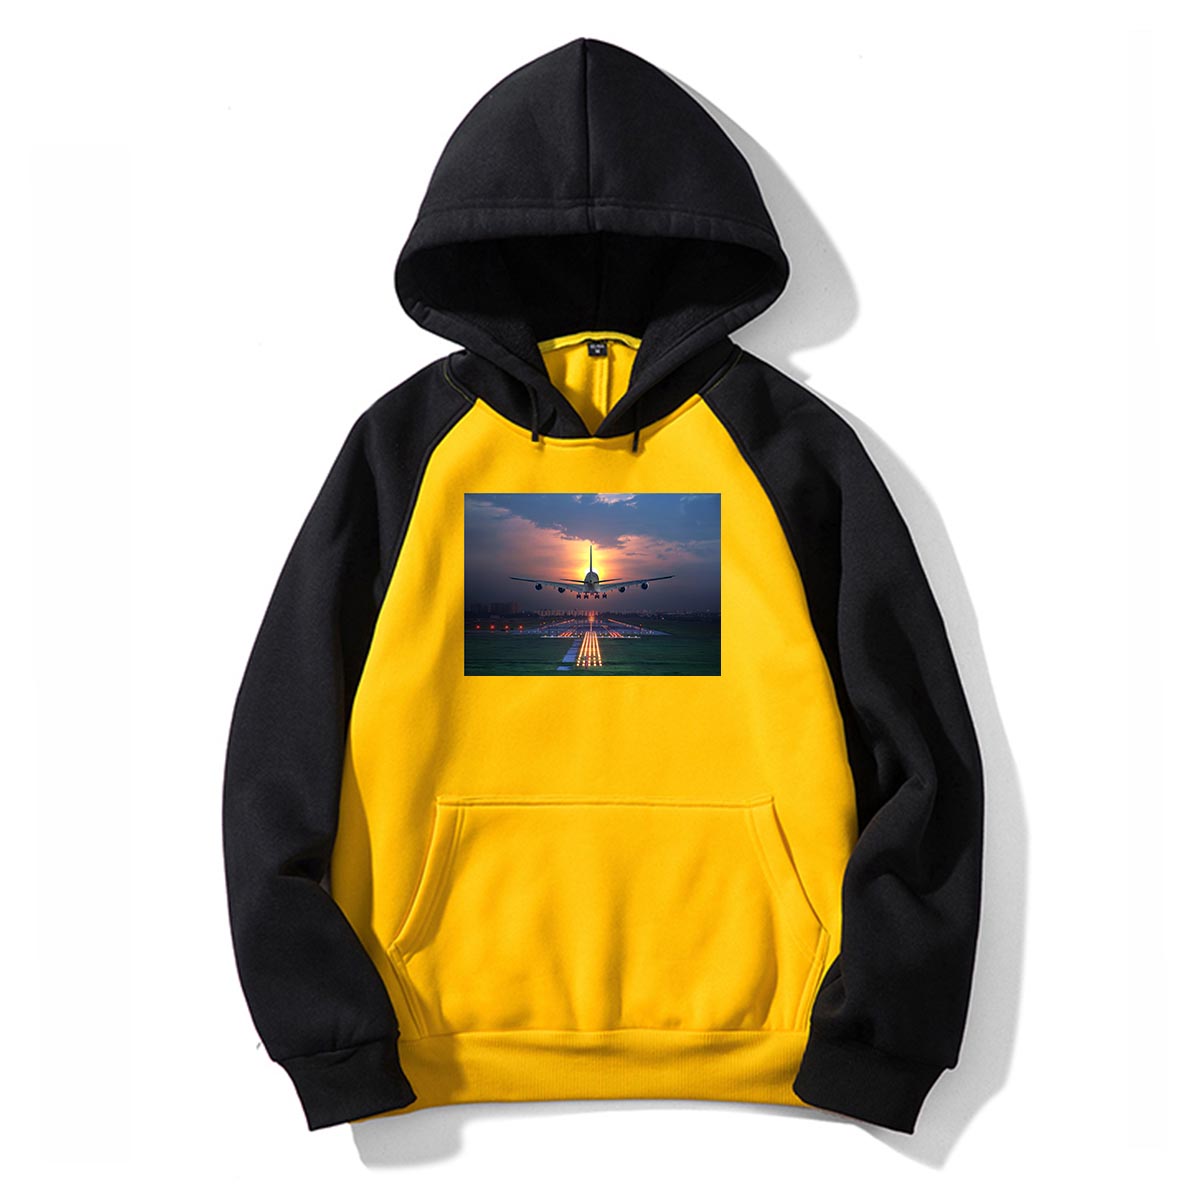 Super Airbus A380 Landing During Sunset Designed Colourful Hoodies